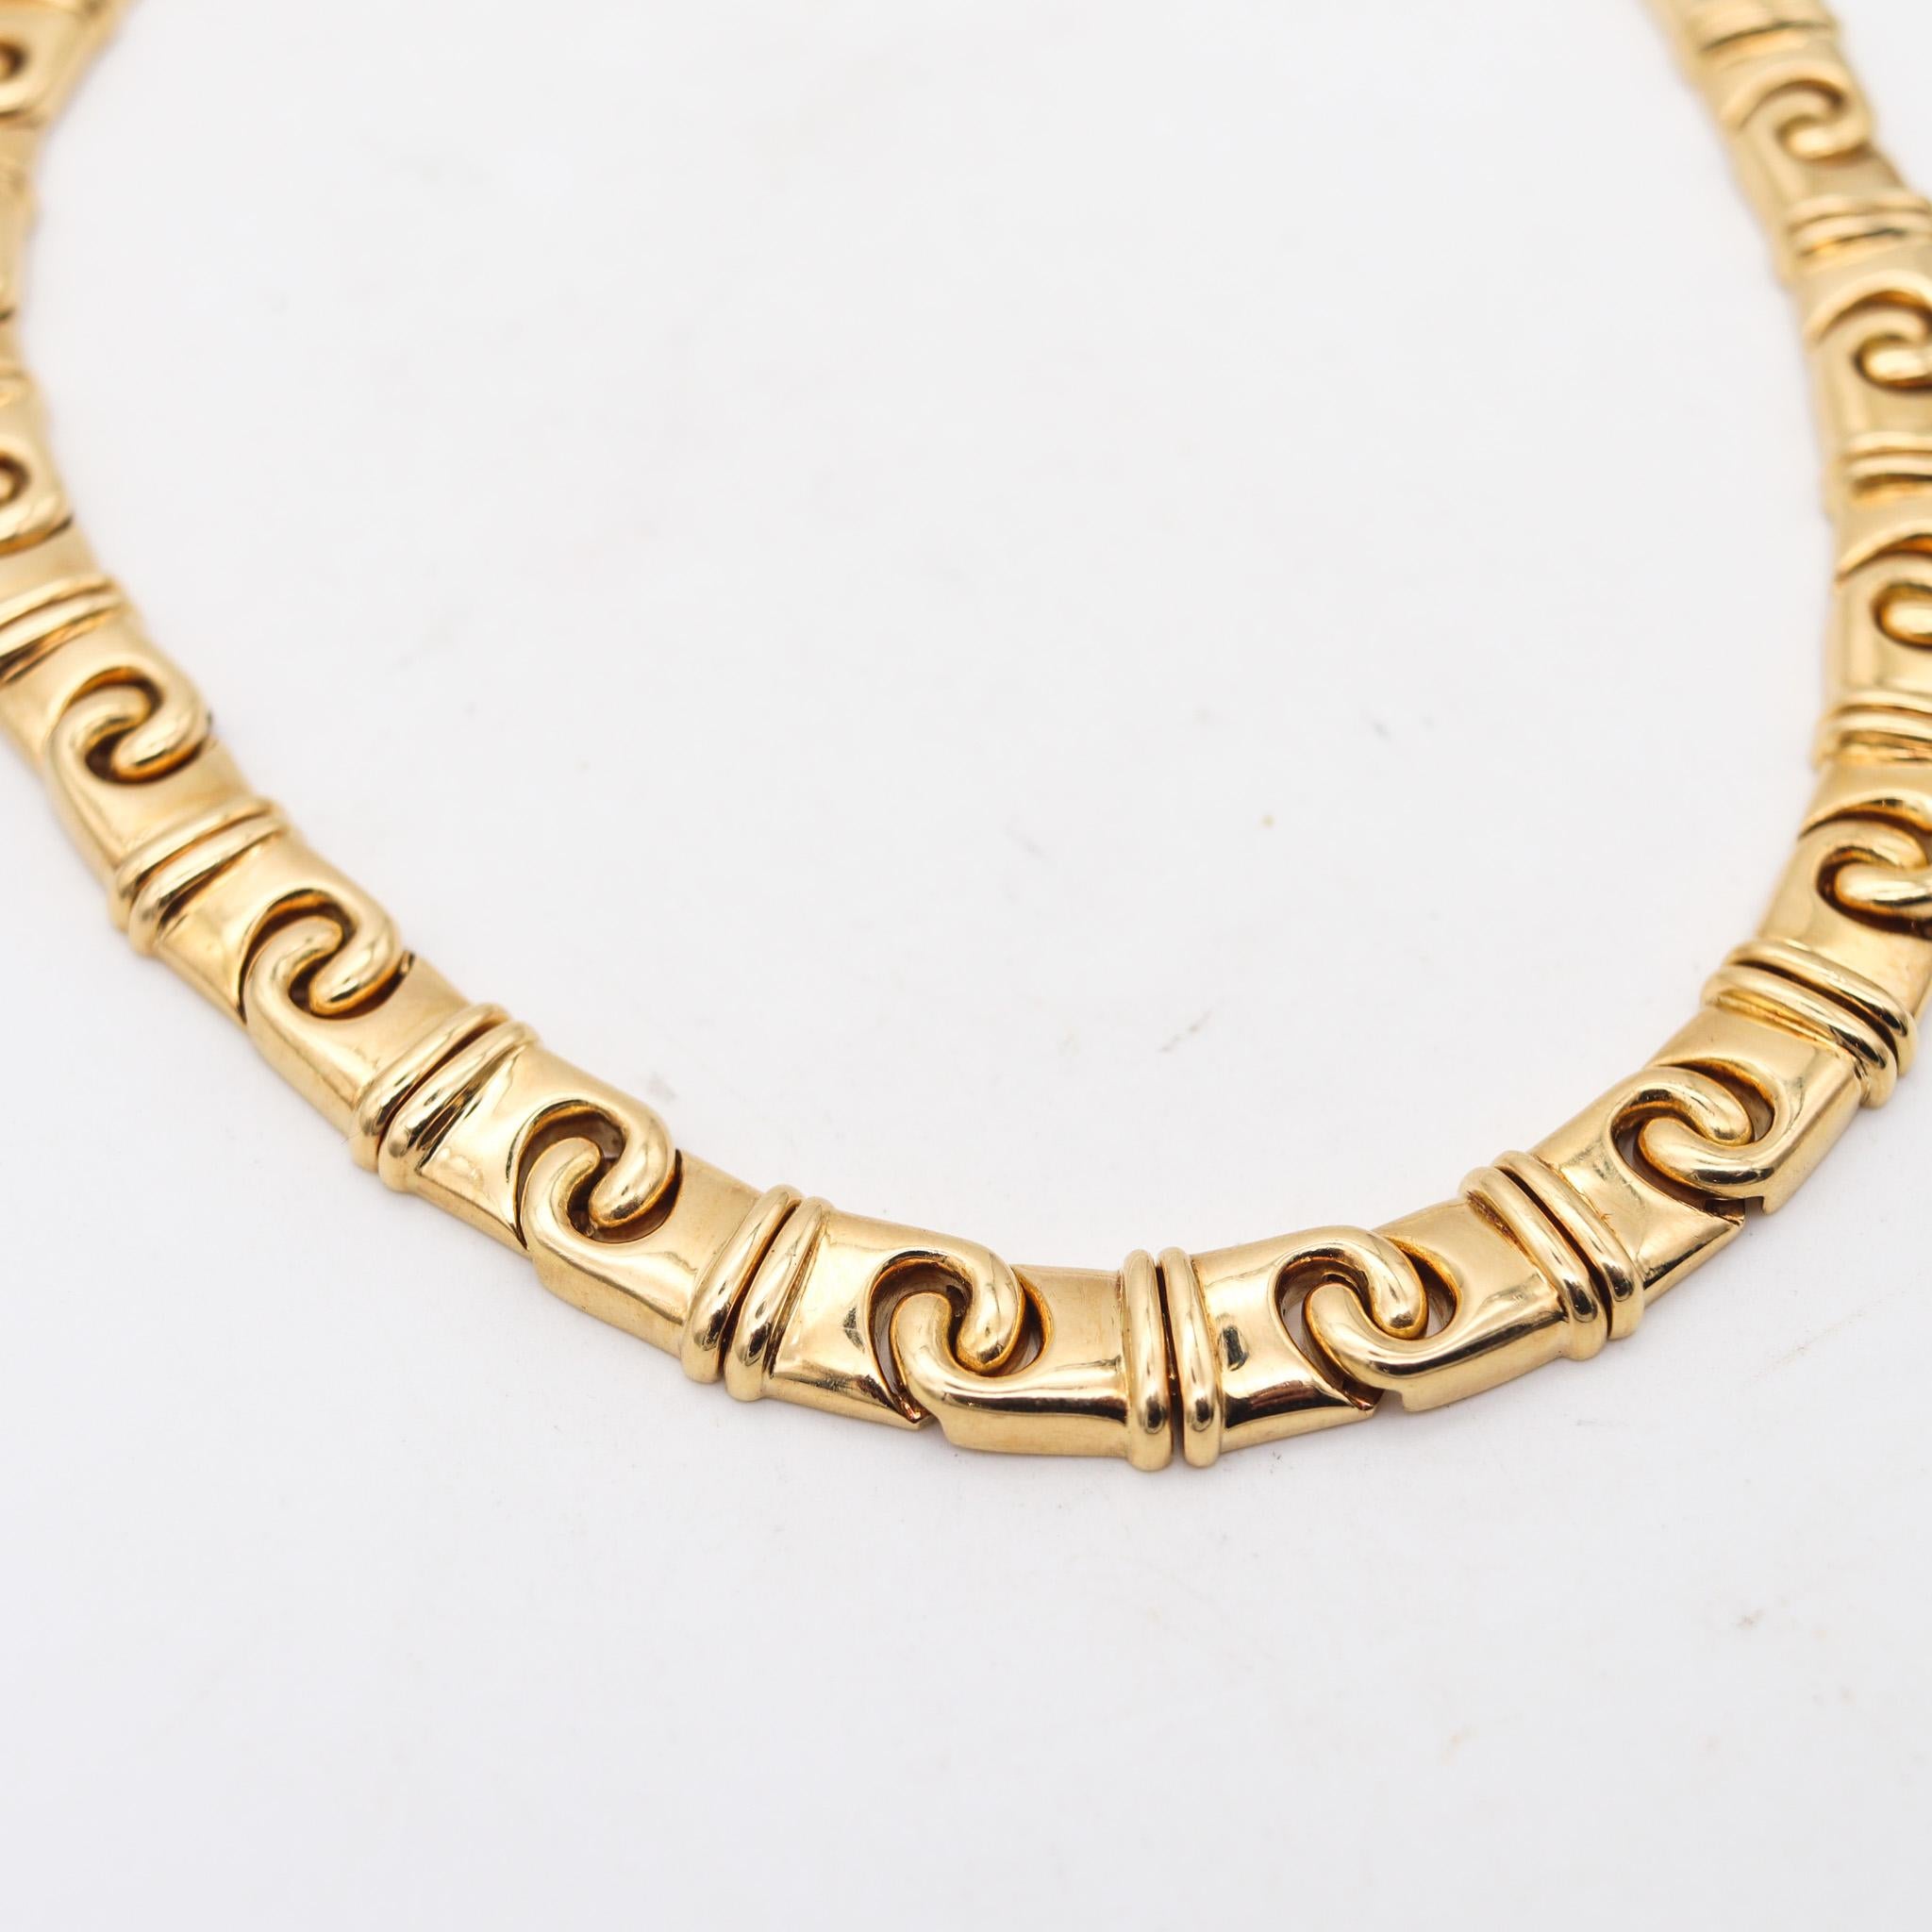 Modernist Bvlgari Roma Doppio Links Collar Necklace In Solid 18Kt Yellow Gold For Sale